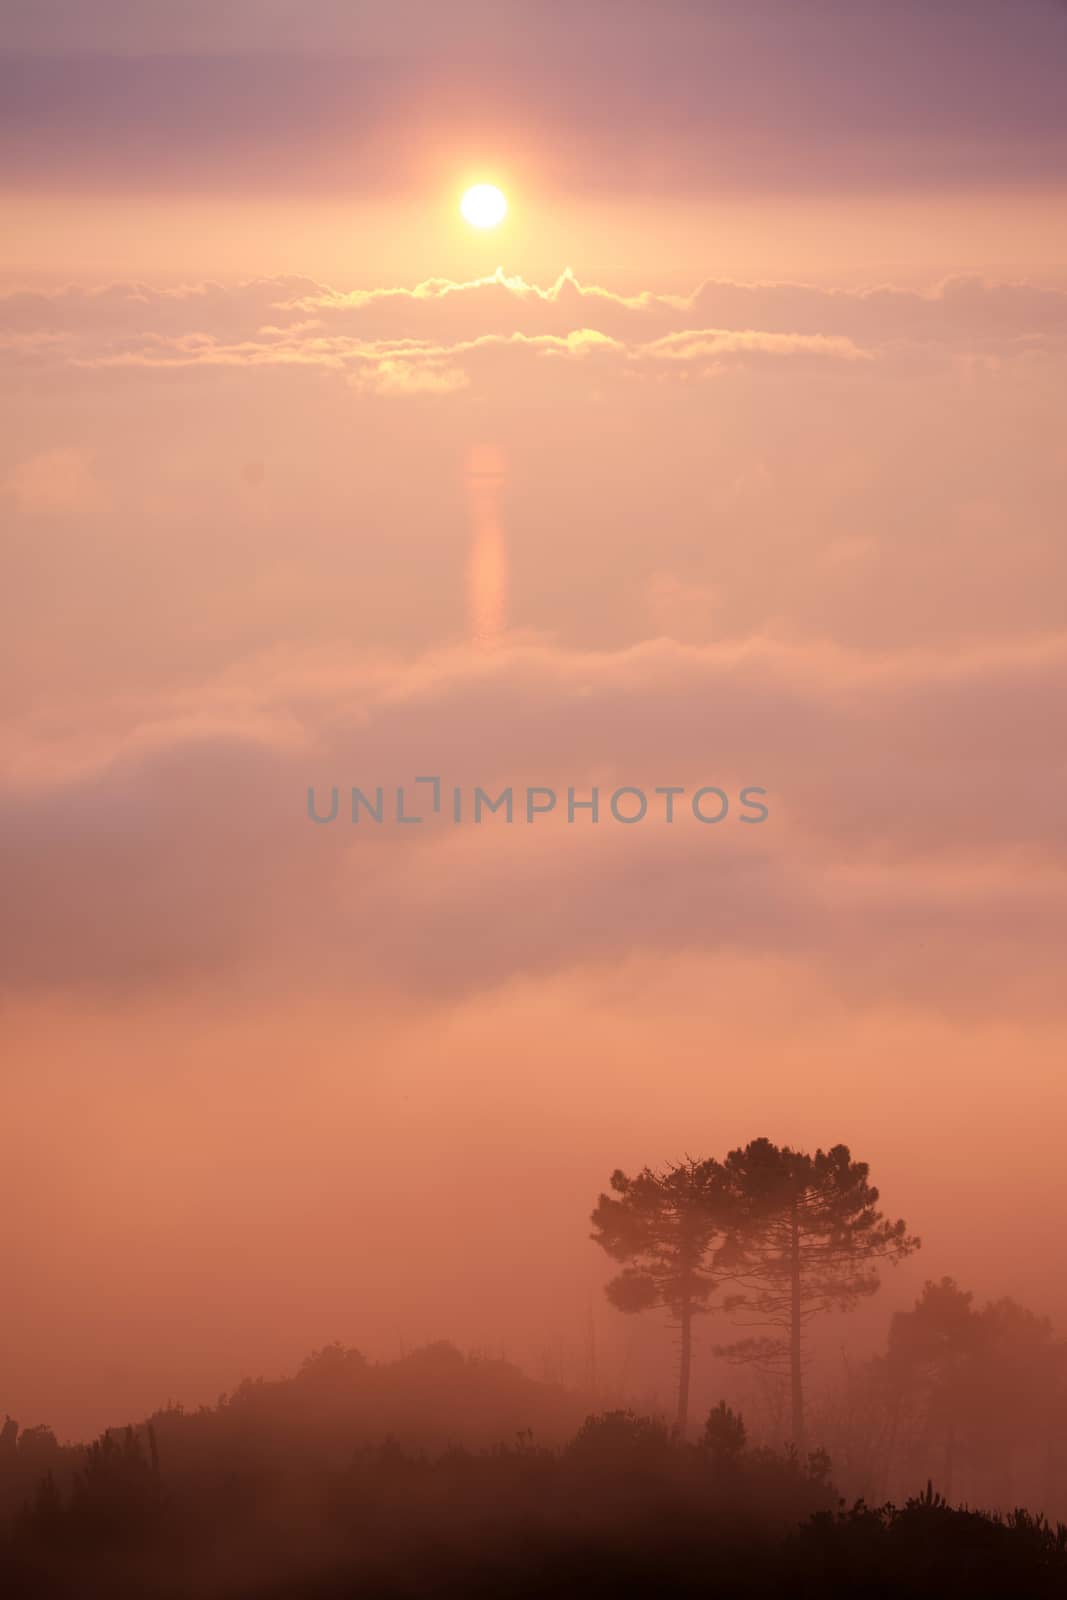 The fog at sunset by fotografiche.eu